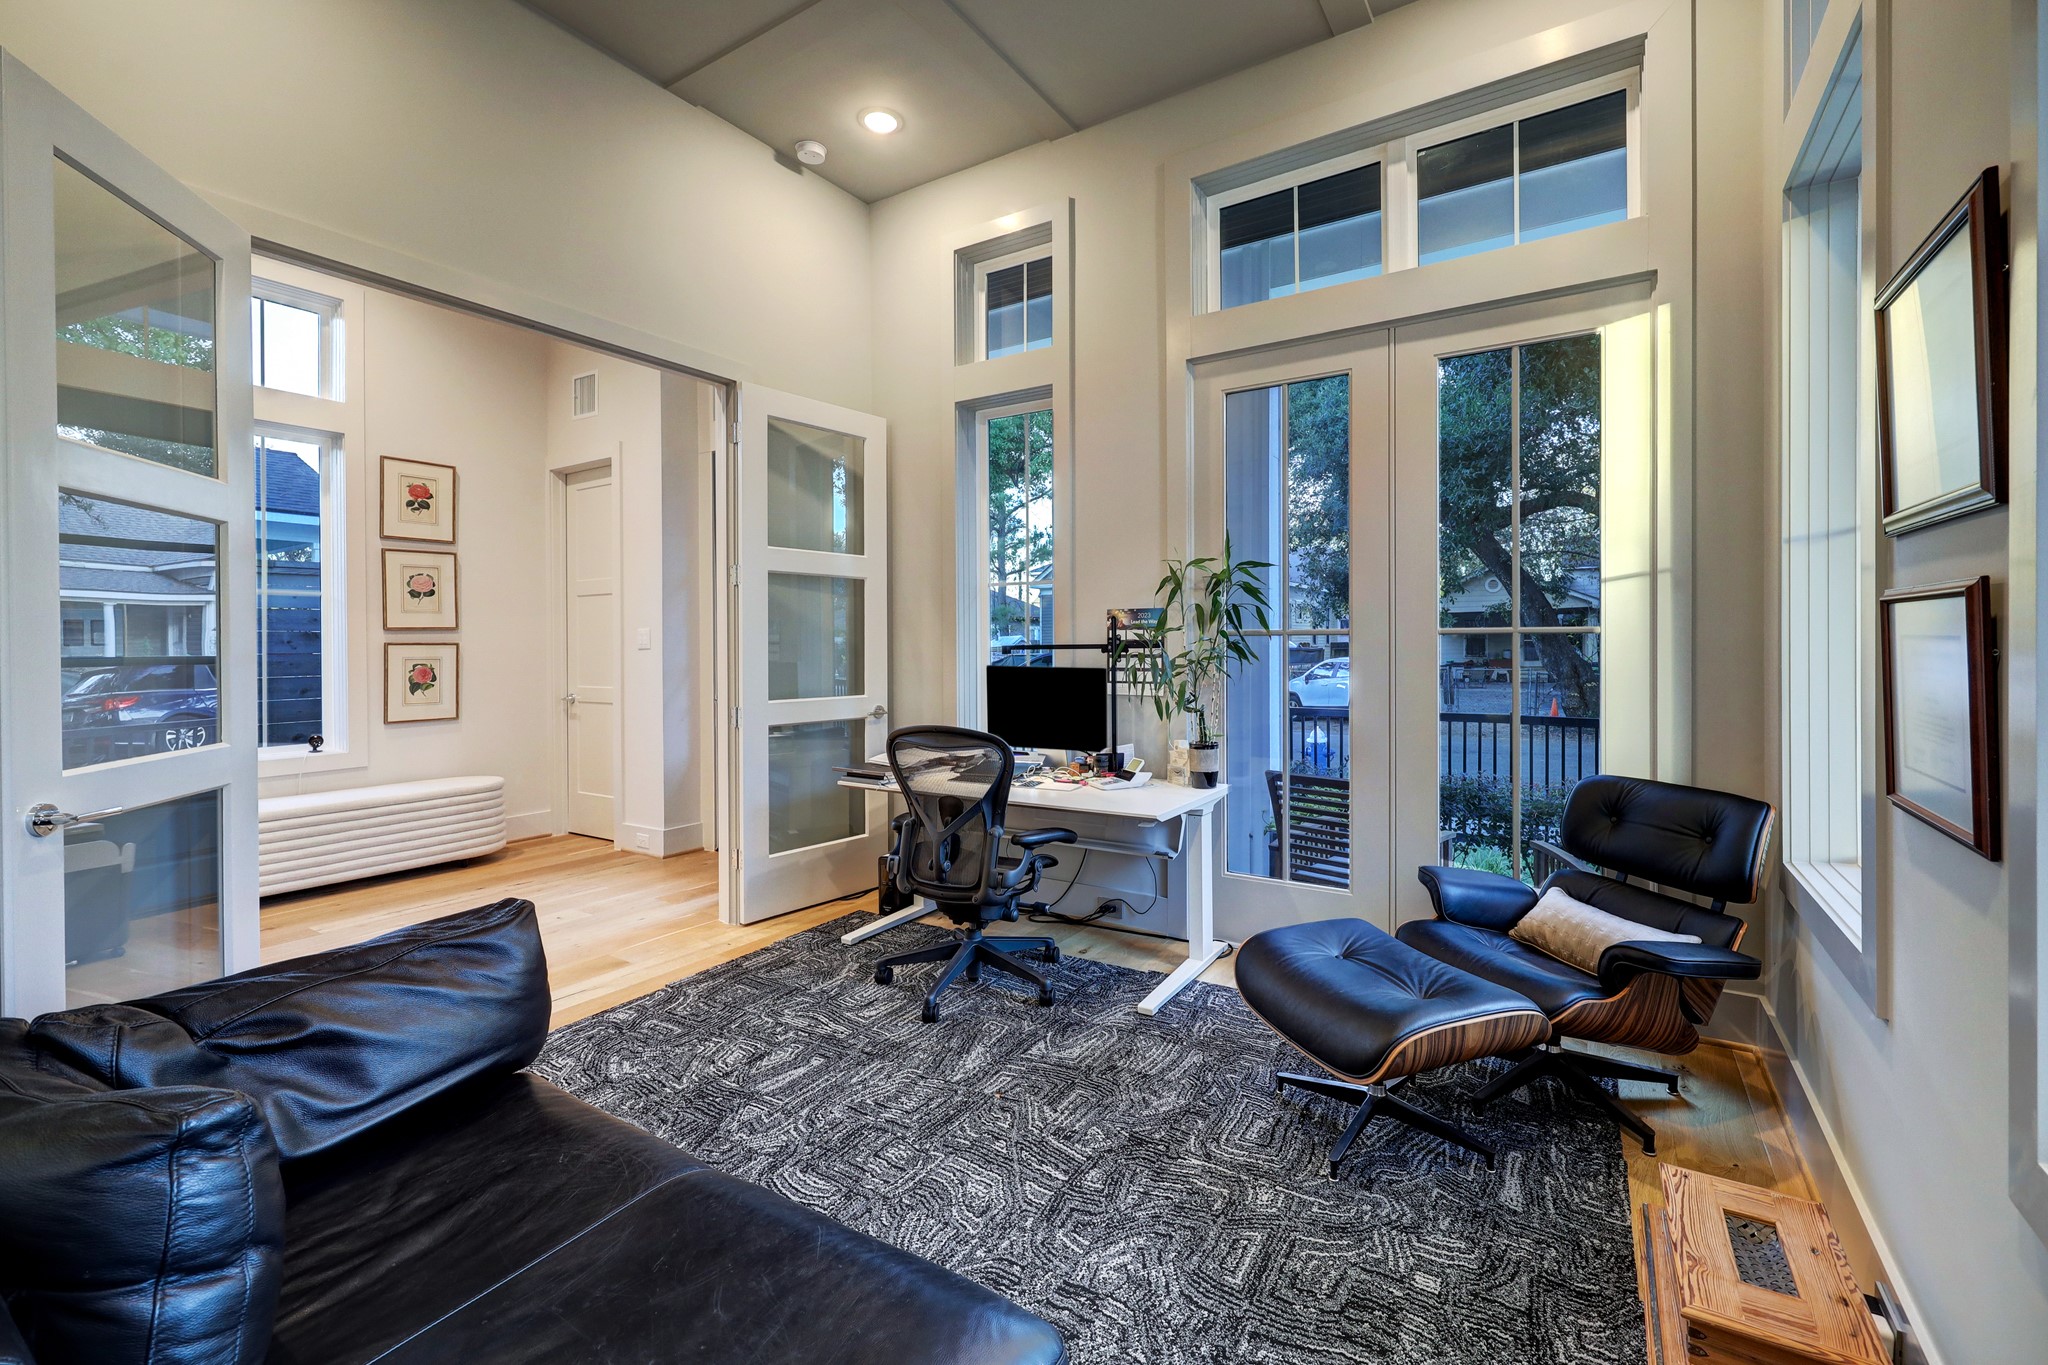 Off the entry, French doors open to a large study with floor-to-ceiling windows, a walk-in closet and direct access to a semi-private bathroom, making the space ideal as a home office or a fifth bedroom.